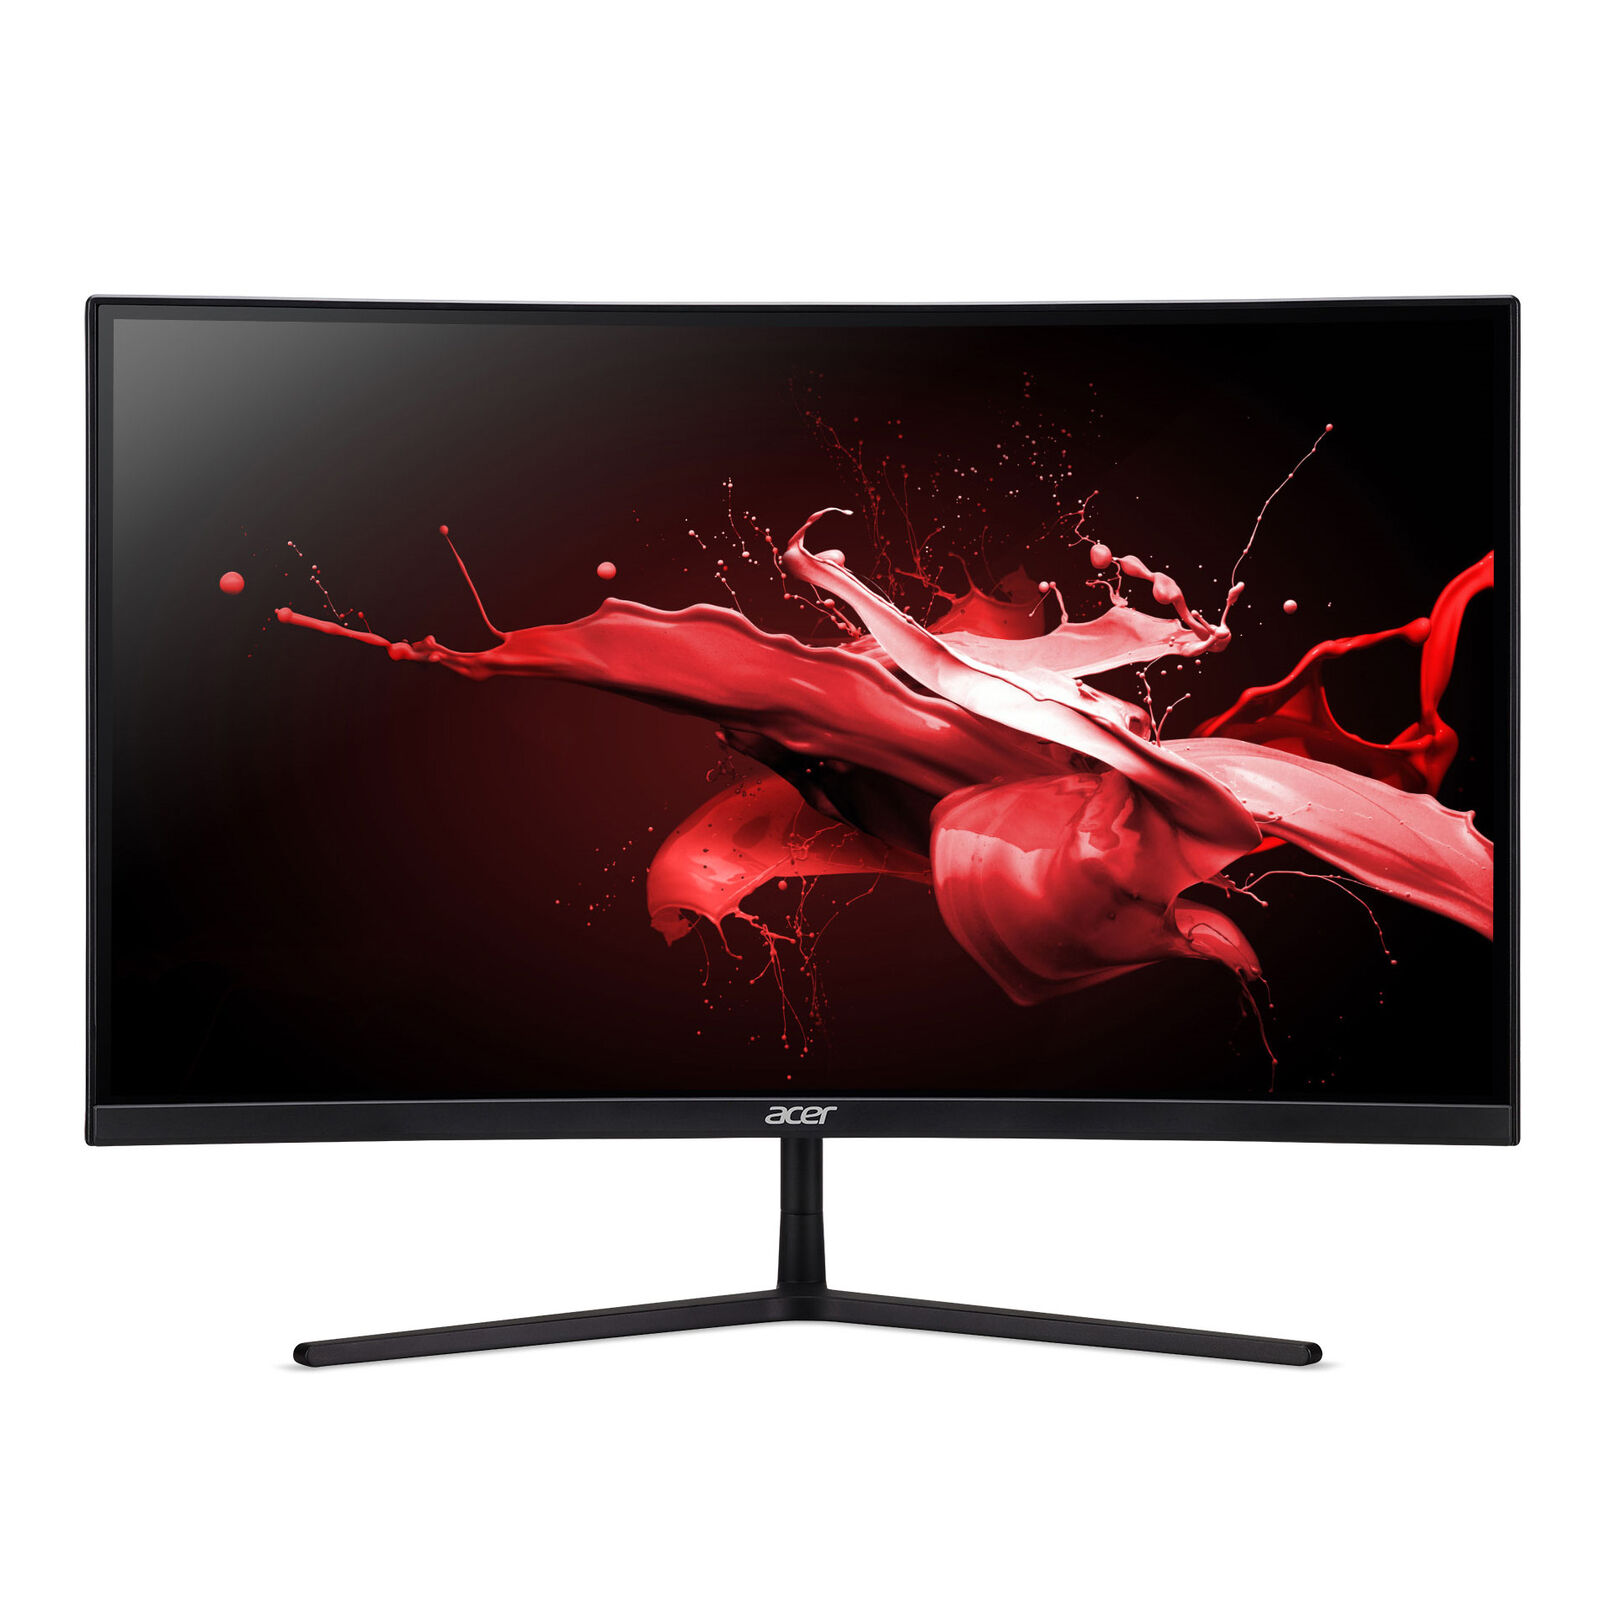 31.5" Acer EI322QUR 2560x1440 WQHD 165Hz Curved Gaming Monitor (Certified Refurbished) $118.29